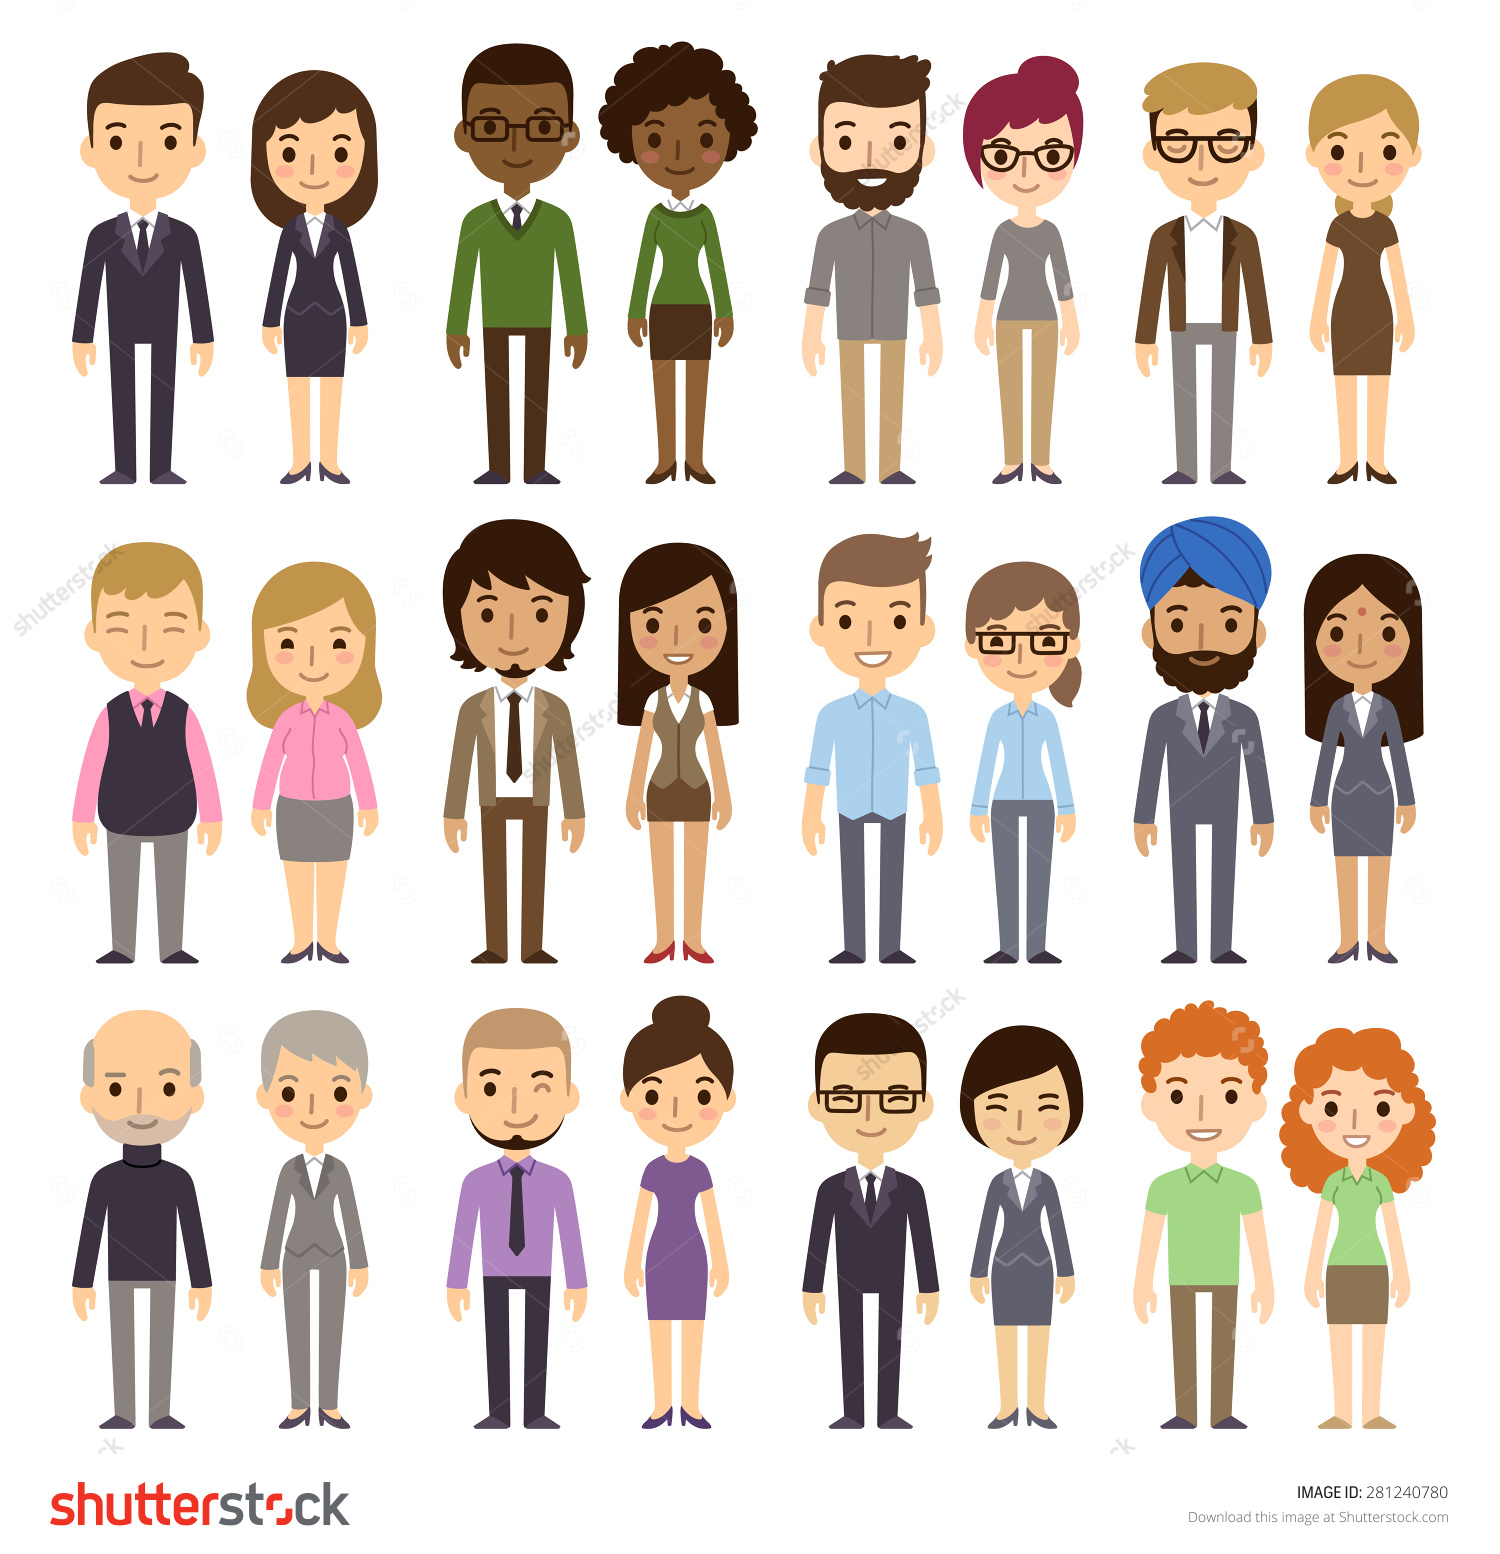 Diversity Clipart Royalty Free